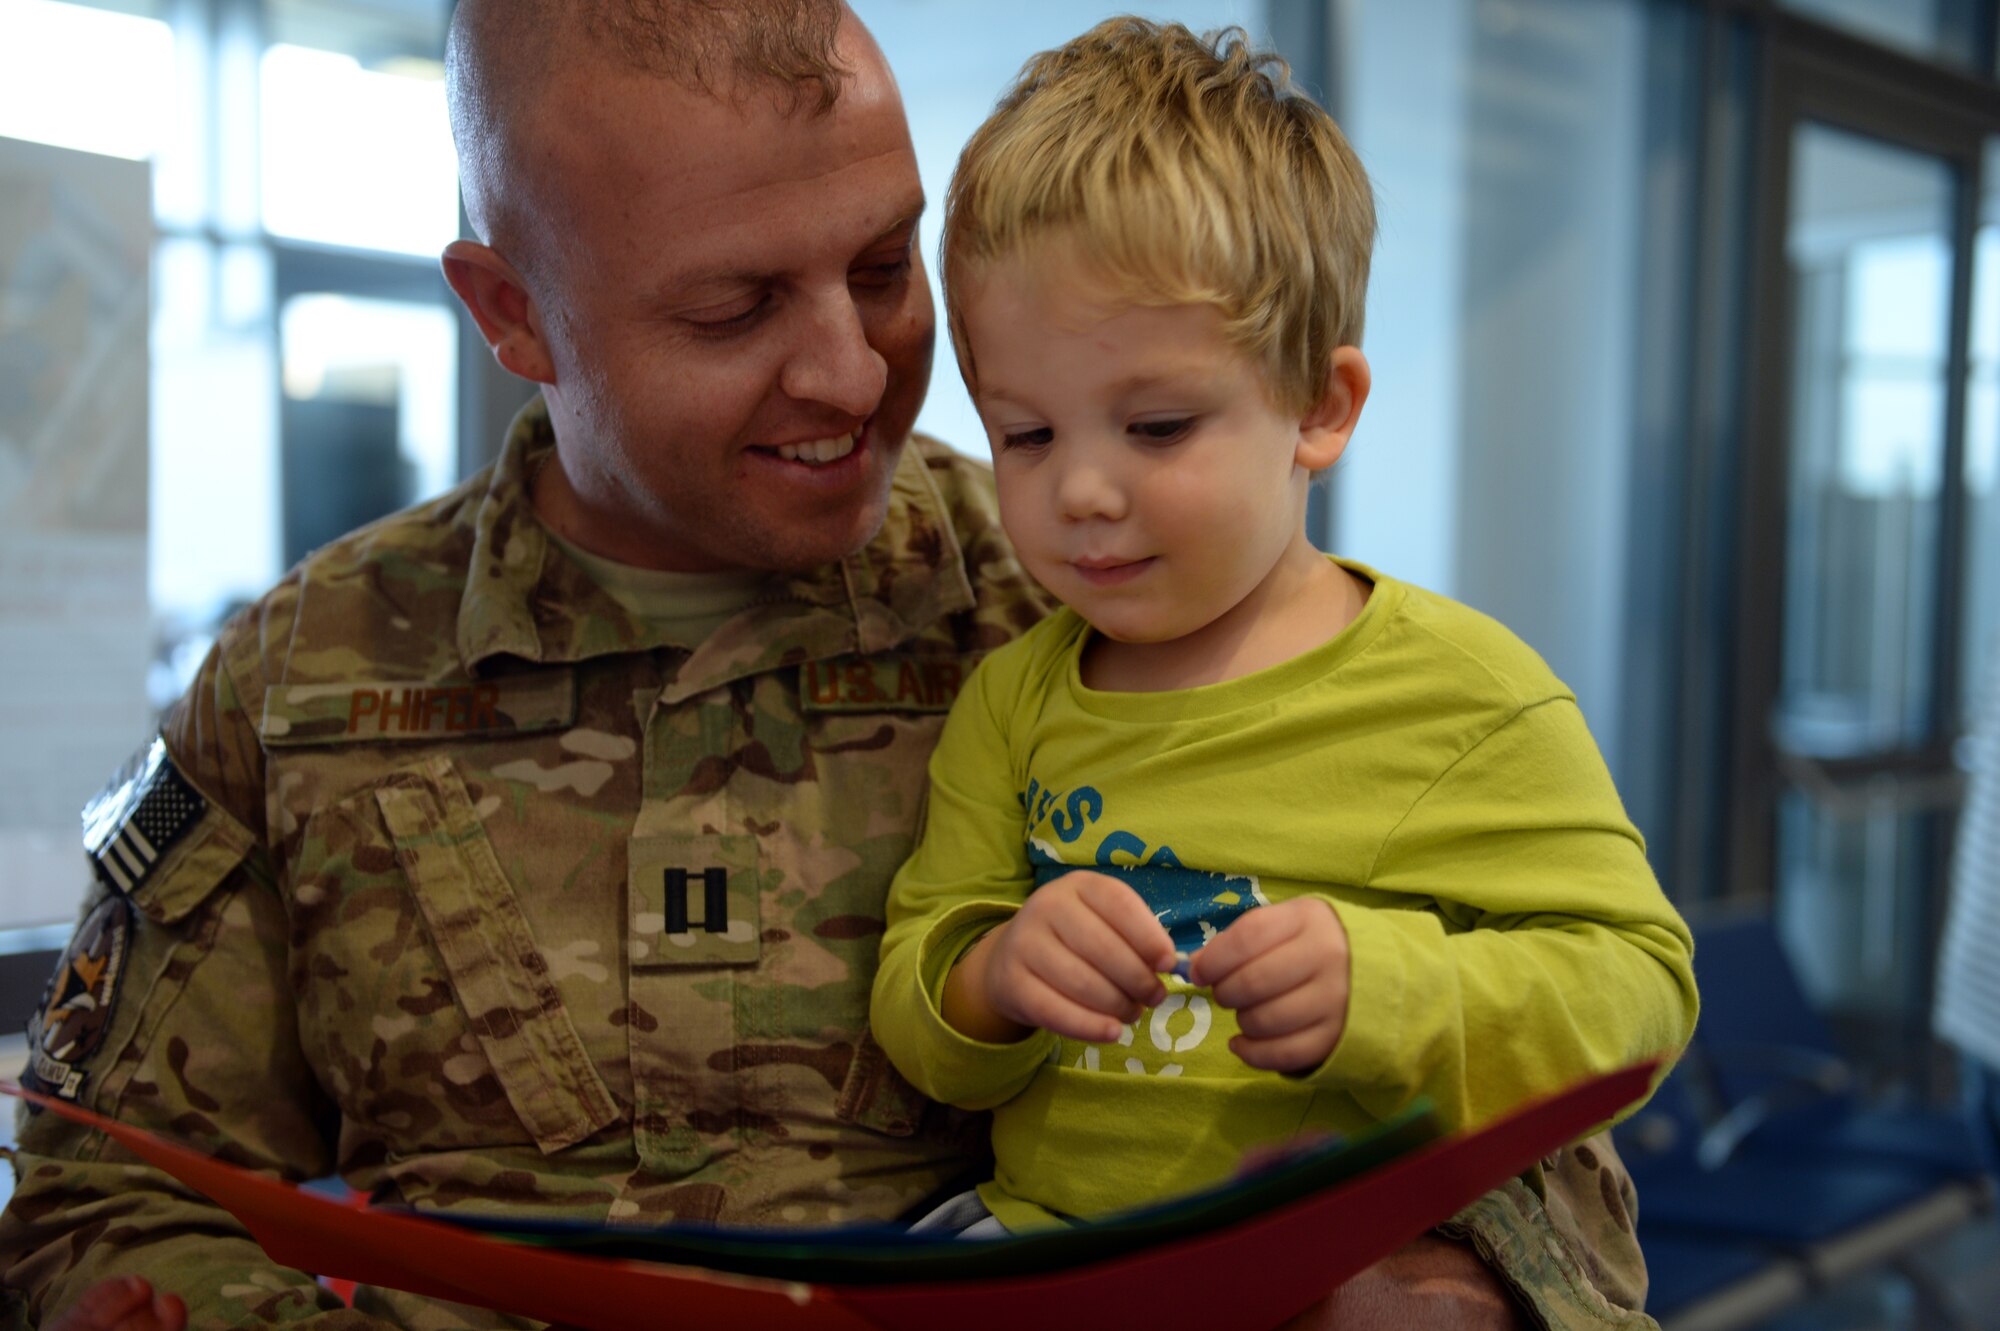 SPANGDAHLEM AIR BASE, Germany — U.S. Air Force Capt. Jeremy Phifer, 480th Aircraft Maintenance Unit officer in charge, holds his 2-year-old son Simon Sept. 21, 2013, after returning from a six-month deployment to support combat operations in Southwest Asia. The 480th Fighter Squadron support community  comprises  nearly 250 Airmen hailing from five maintenance career fields. (U.S. Air Force photo by Senior Airman Alexis Siekert/Released)